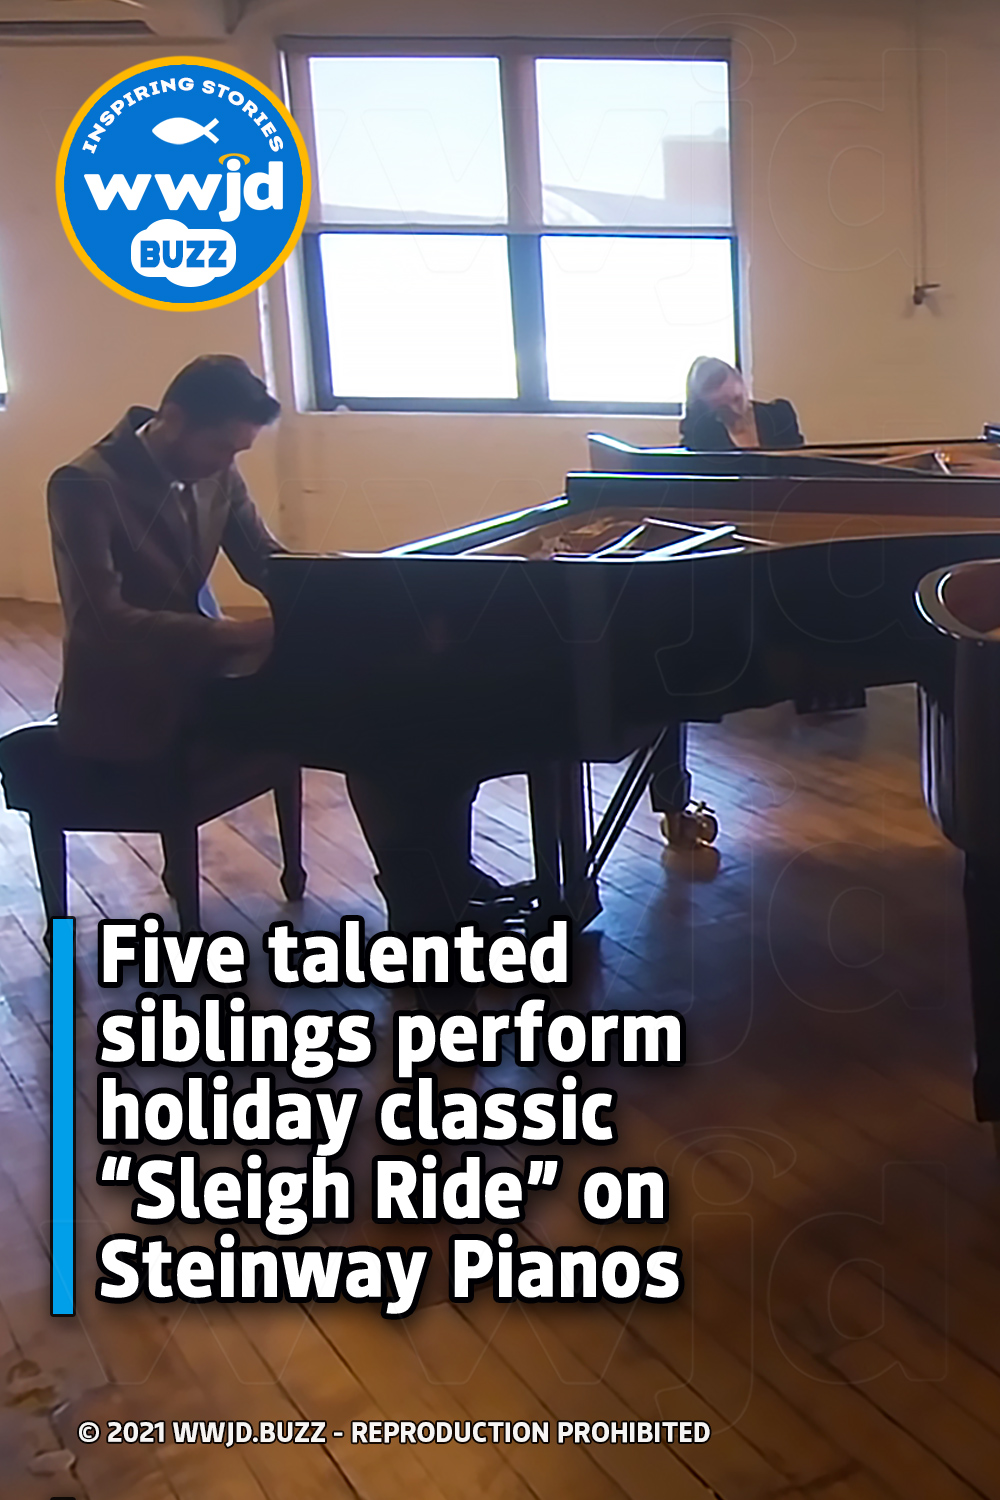 Five talented siblings perform holiday classic “Sleigh Ride” on Steinway Pianos